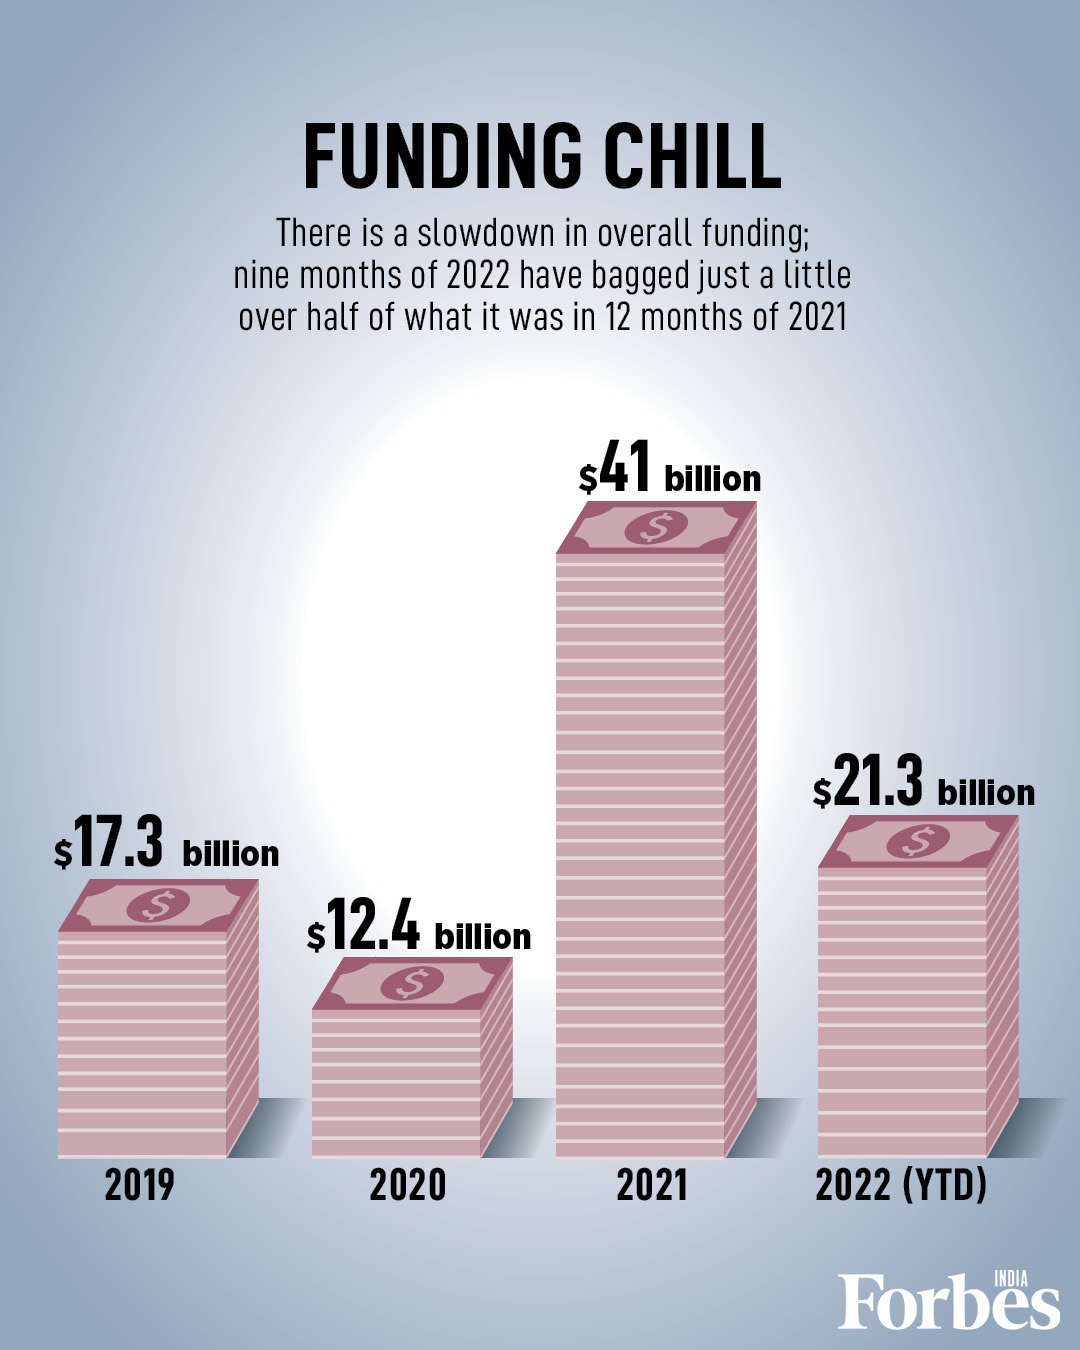 From the sunshine of early-stage funding to damp unicorn runs, numbers unfurl the story of funding winter